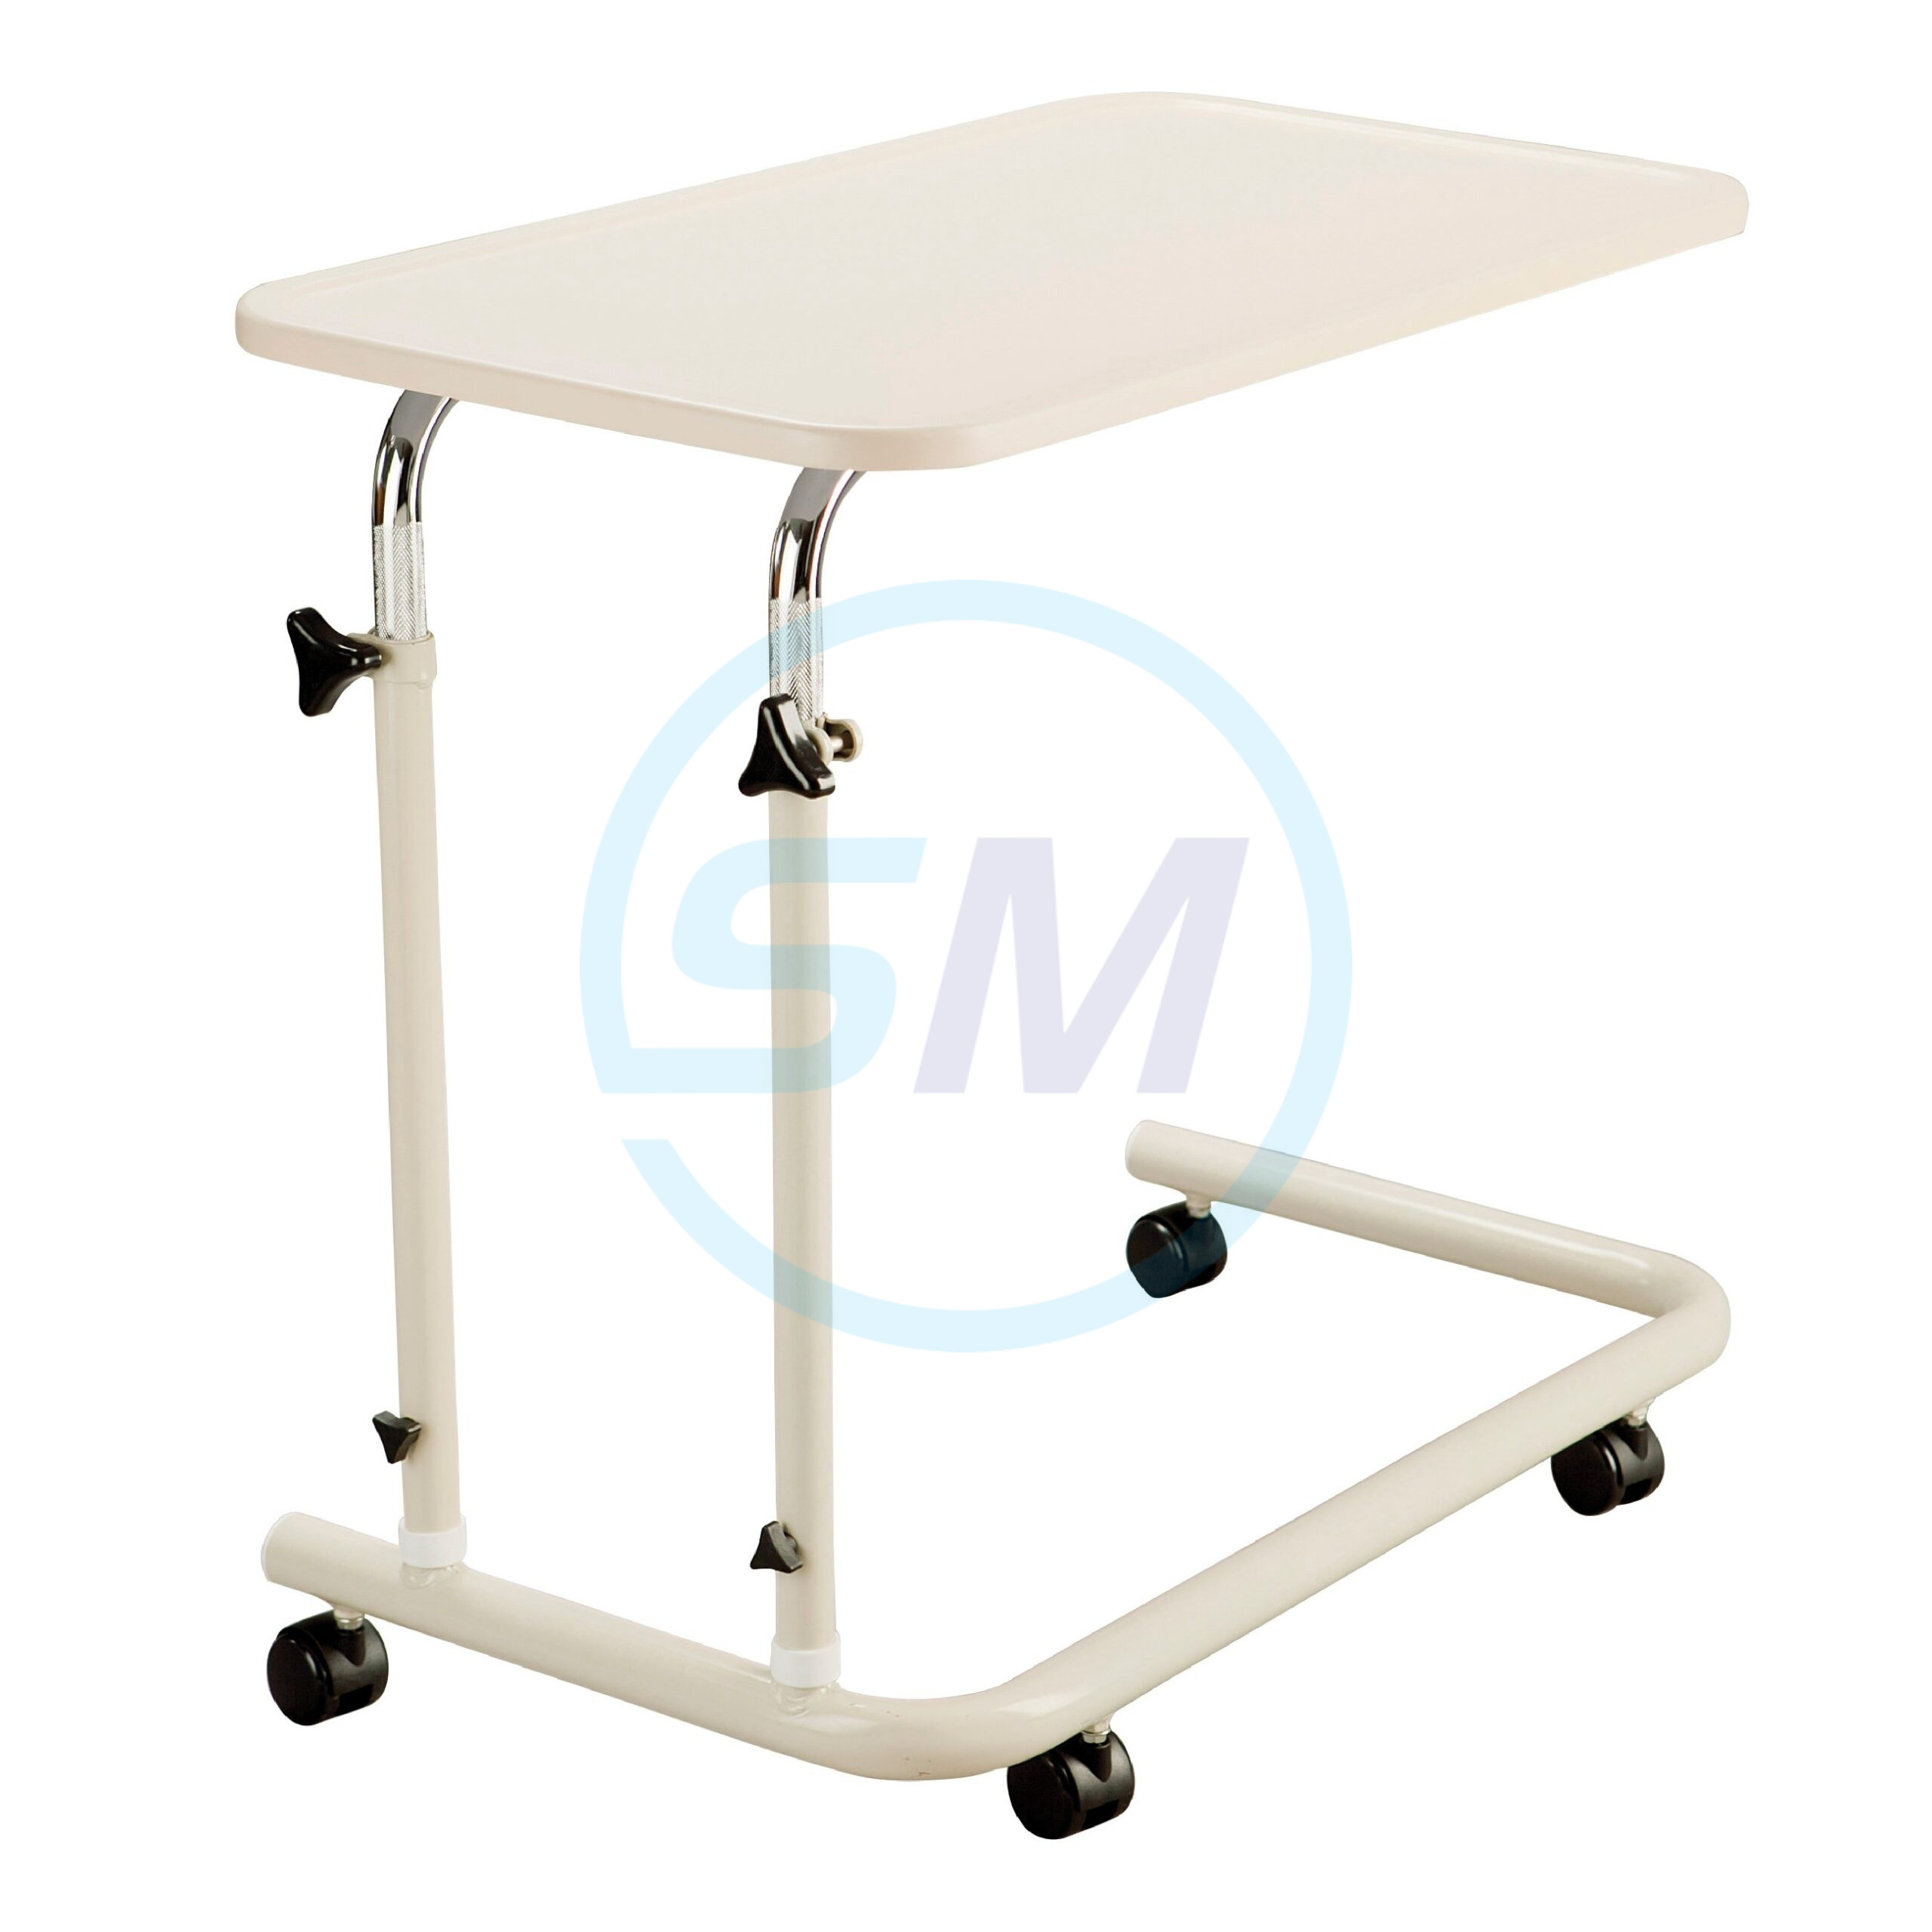 Overbed Twin Column Table Spring Lift